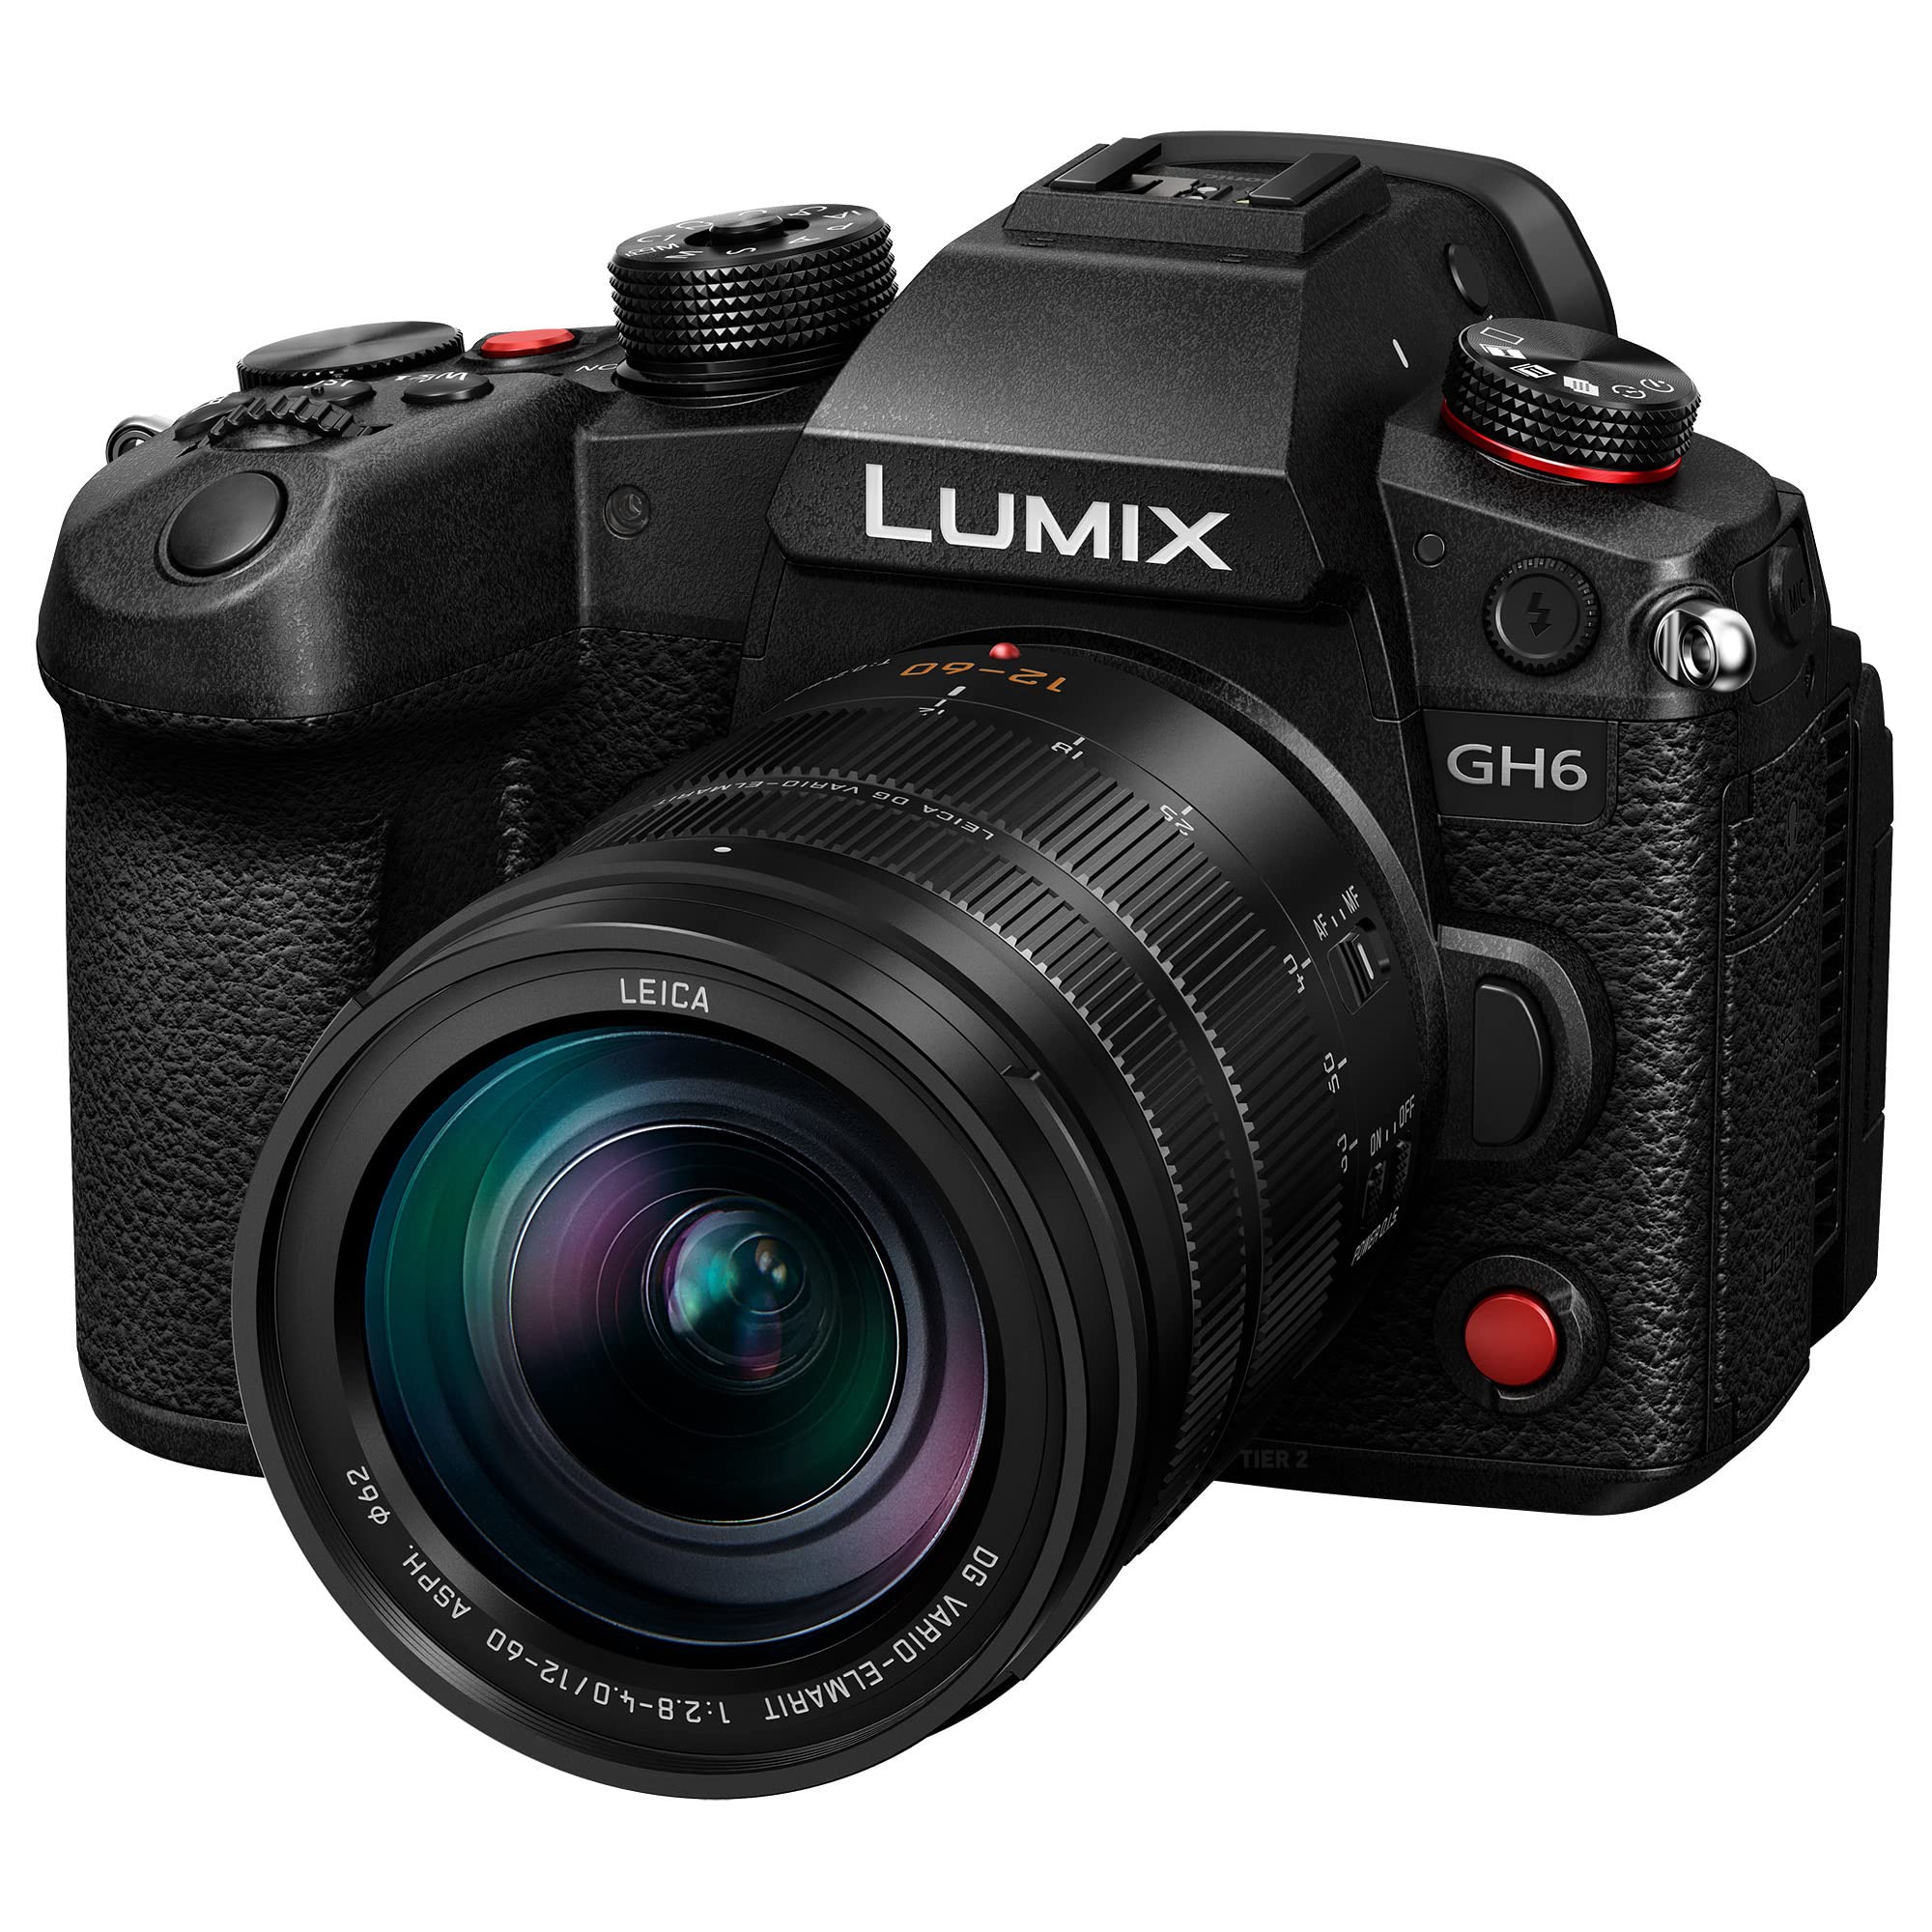 Panasonic Lumix GH6 Mirrorless Camera with 12-60mm f/2.8-4 Lens and Panasonic DMW-BLK22 7.4V 3050mAh Lithium-ion Battery Pack for LUMIX S5, GH5, G9, GH5s Bundle (2 Items)